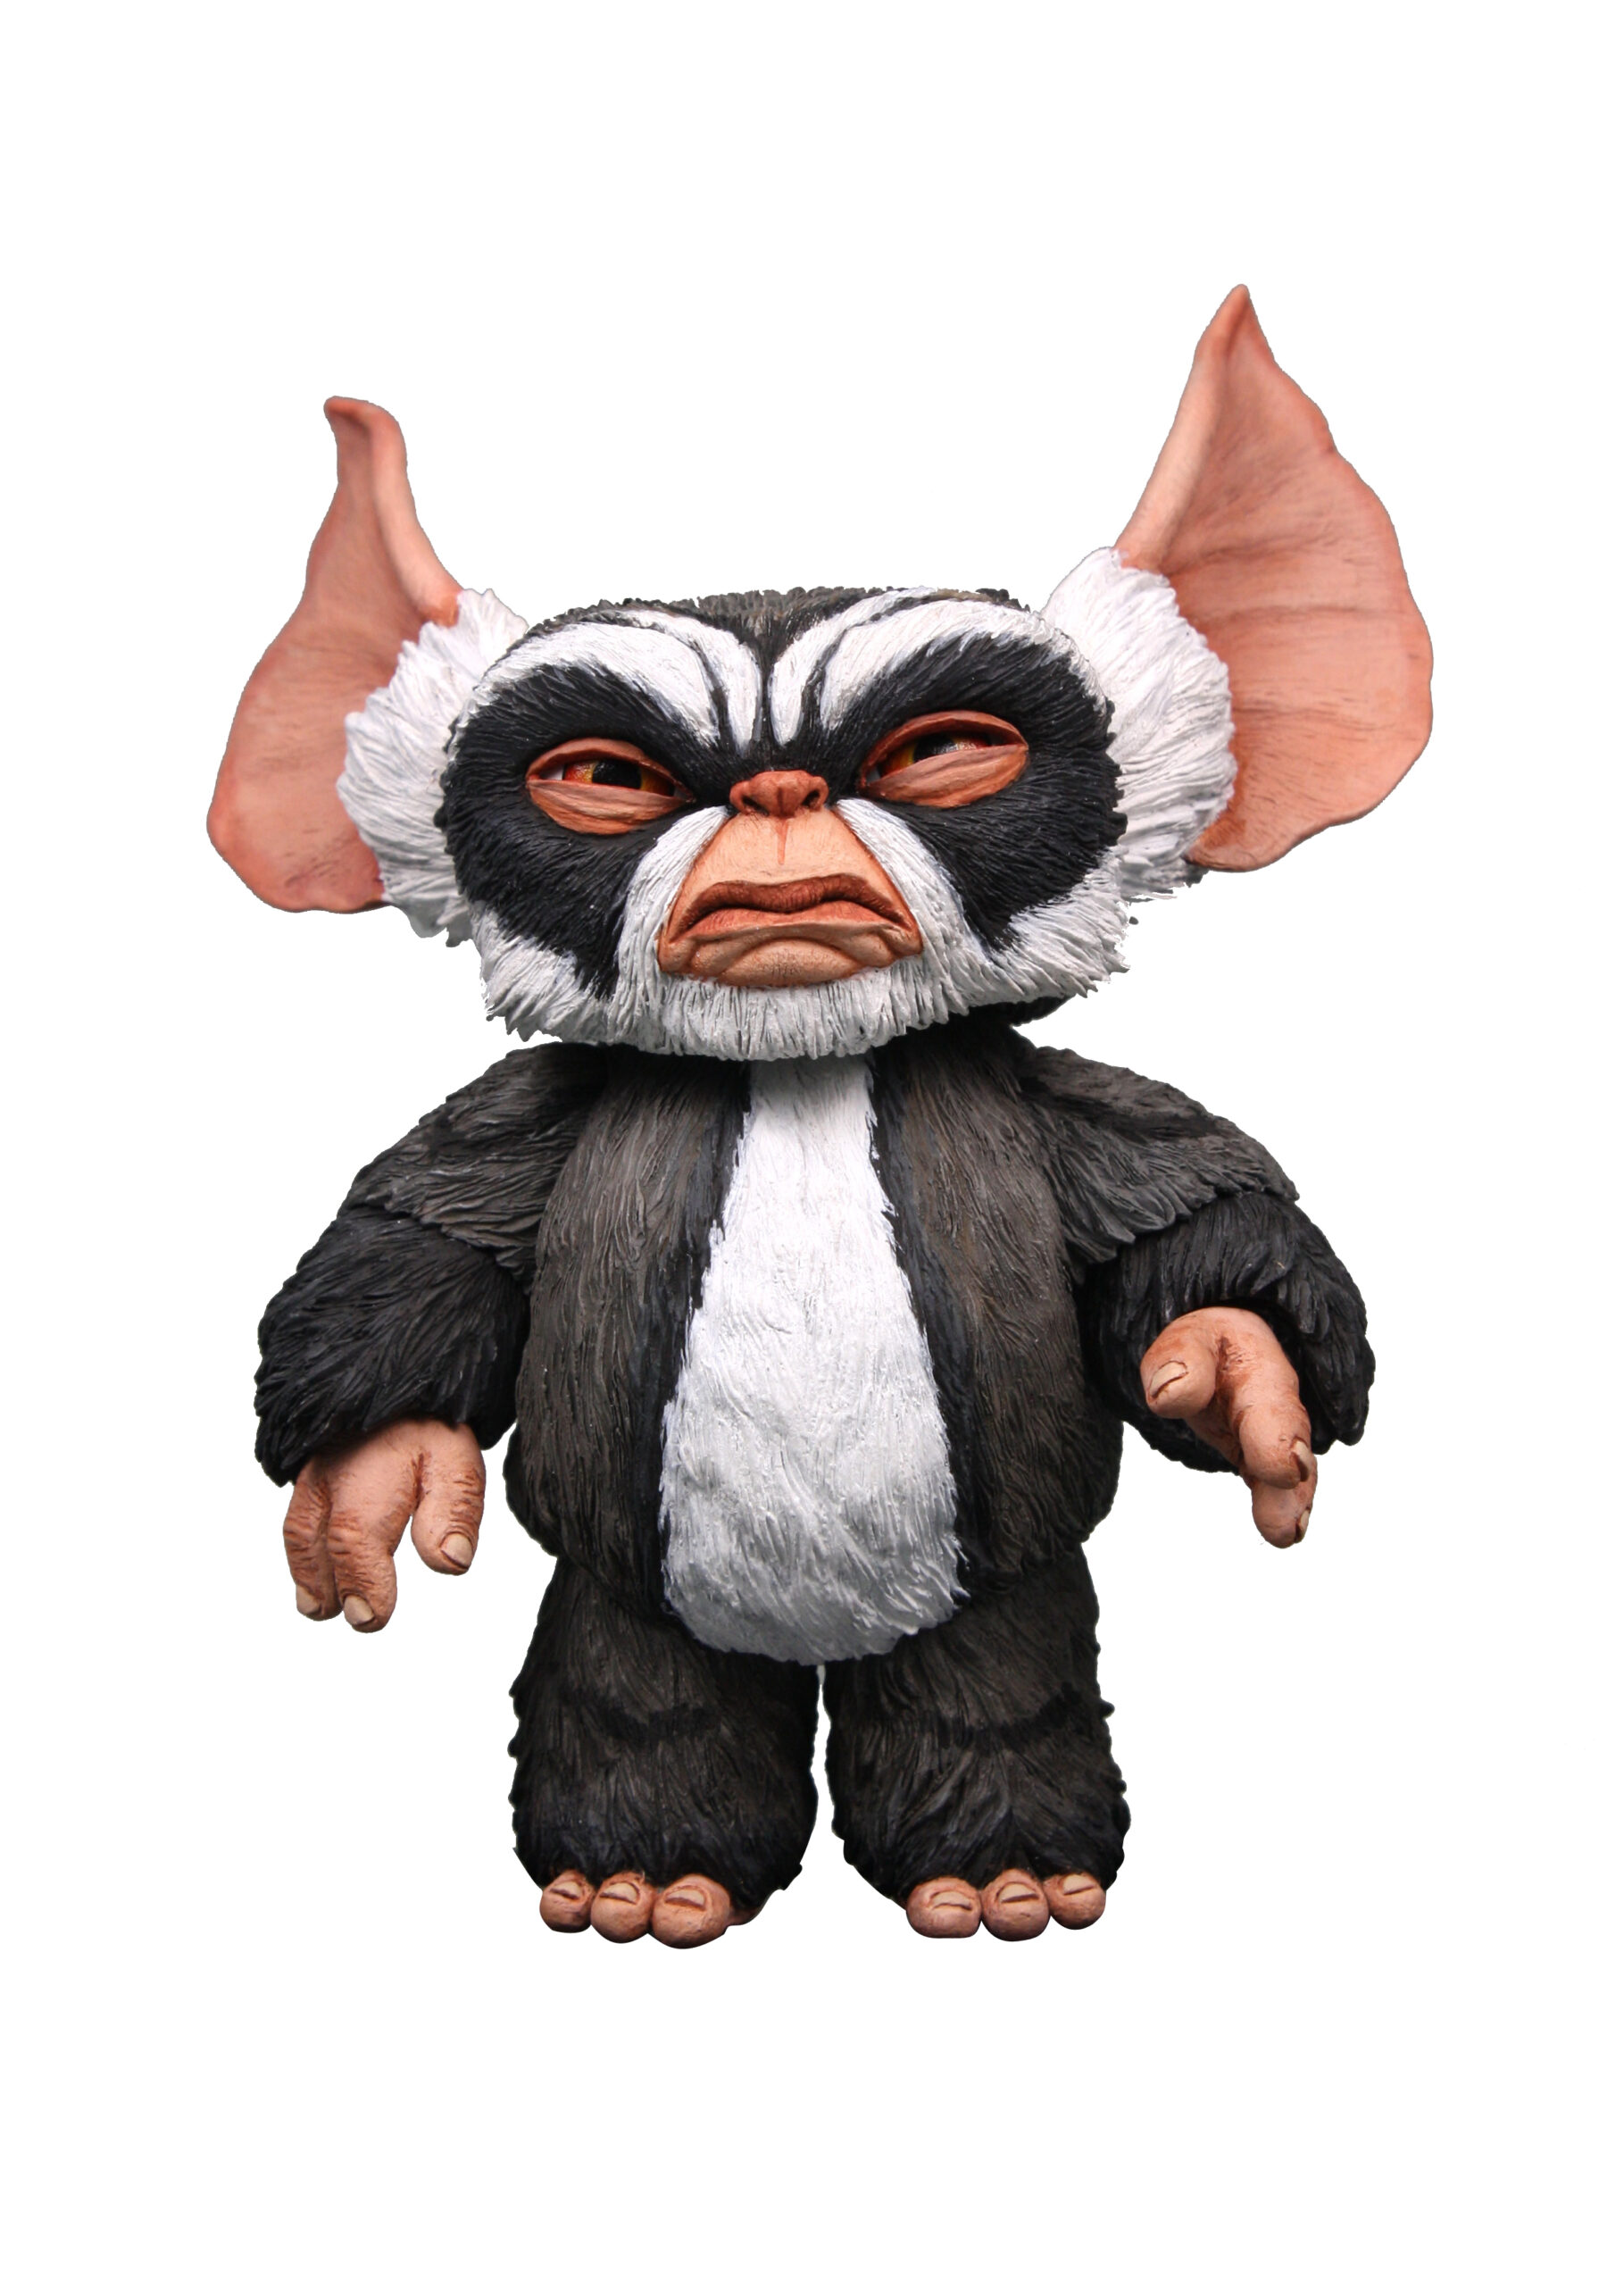 Gremlins 2: The New Batch - George 7" Action Figure